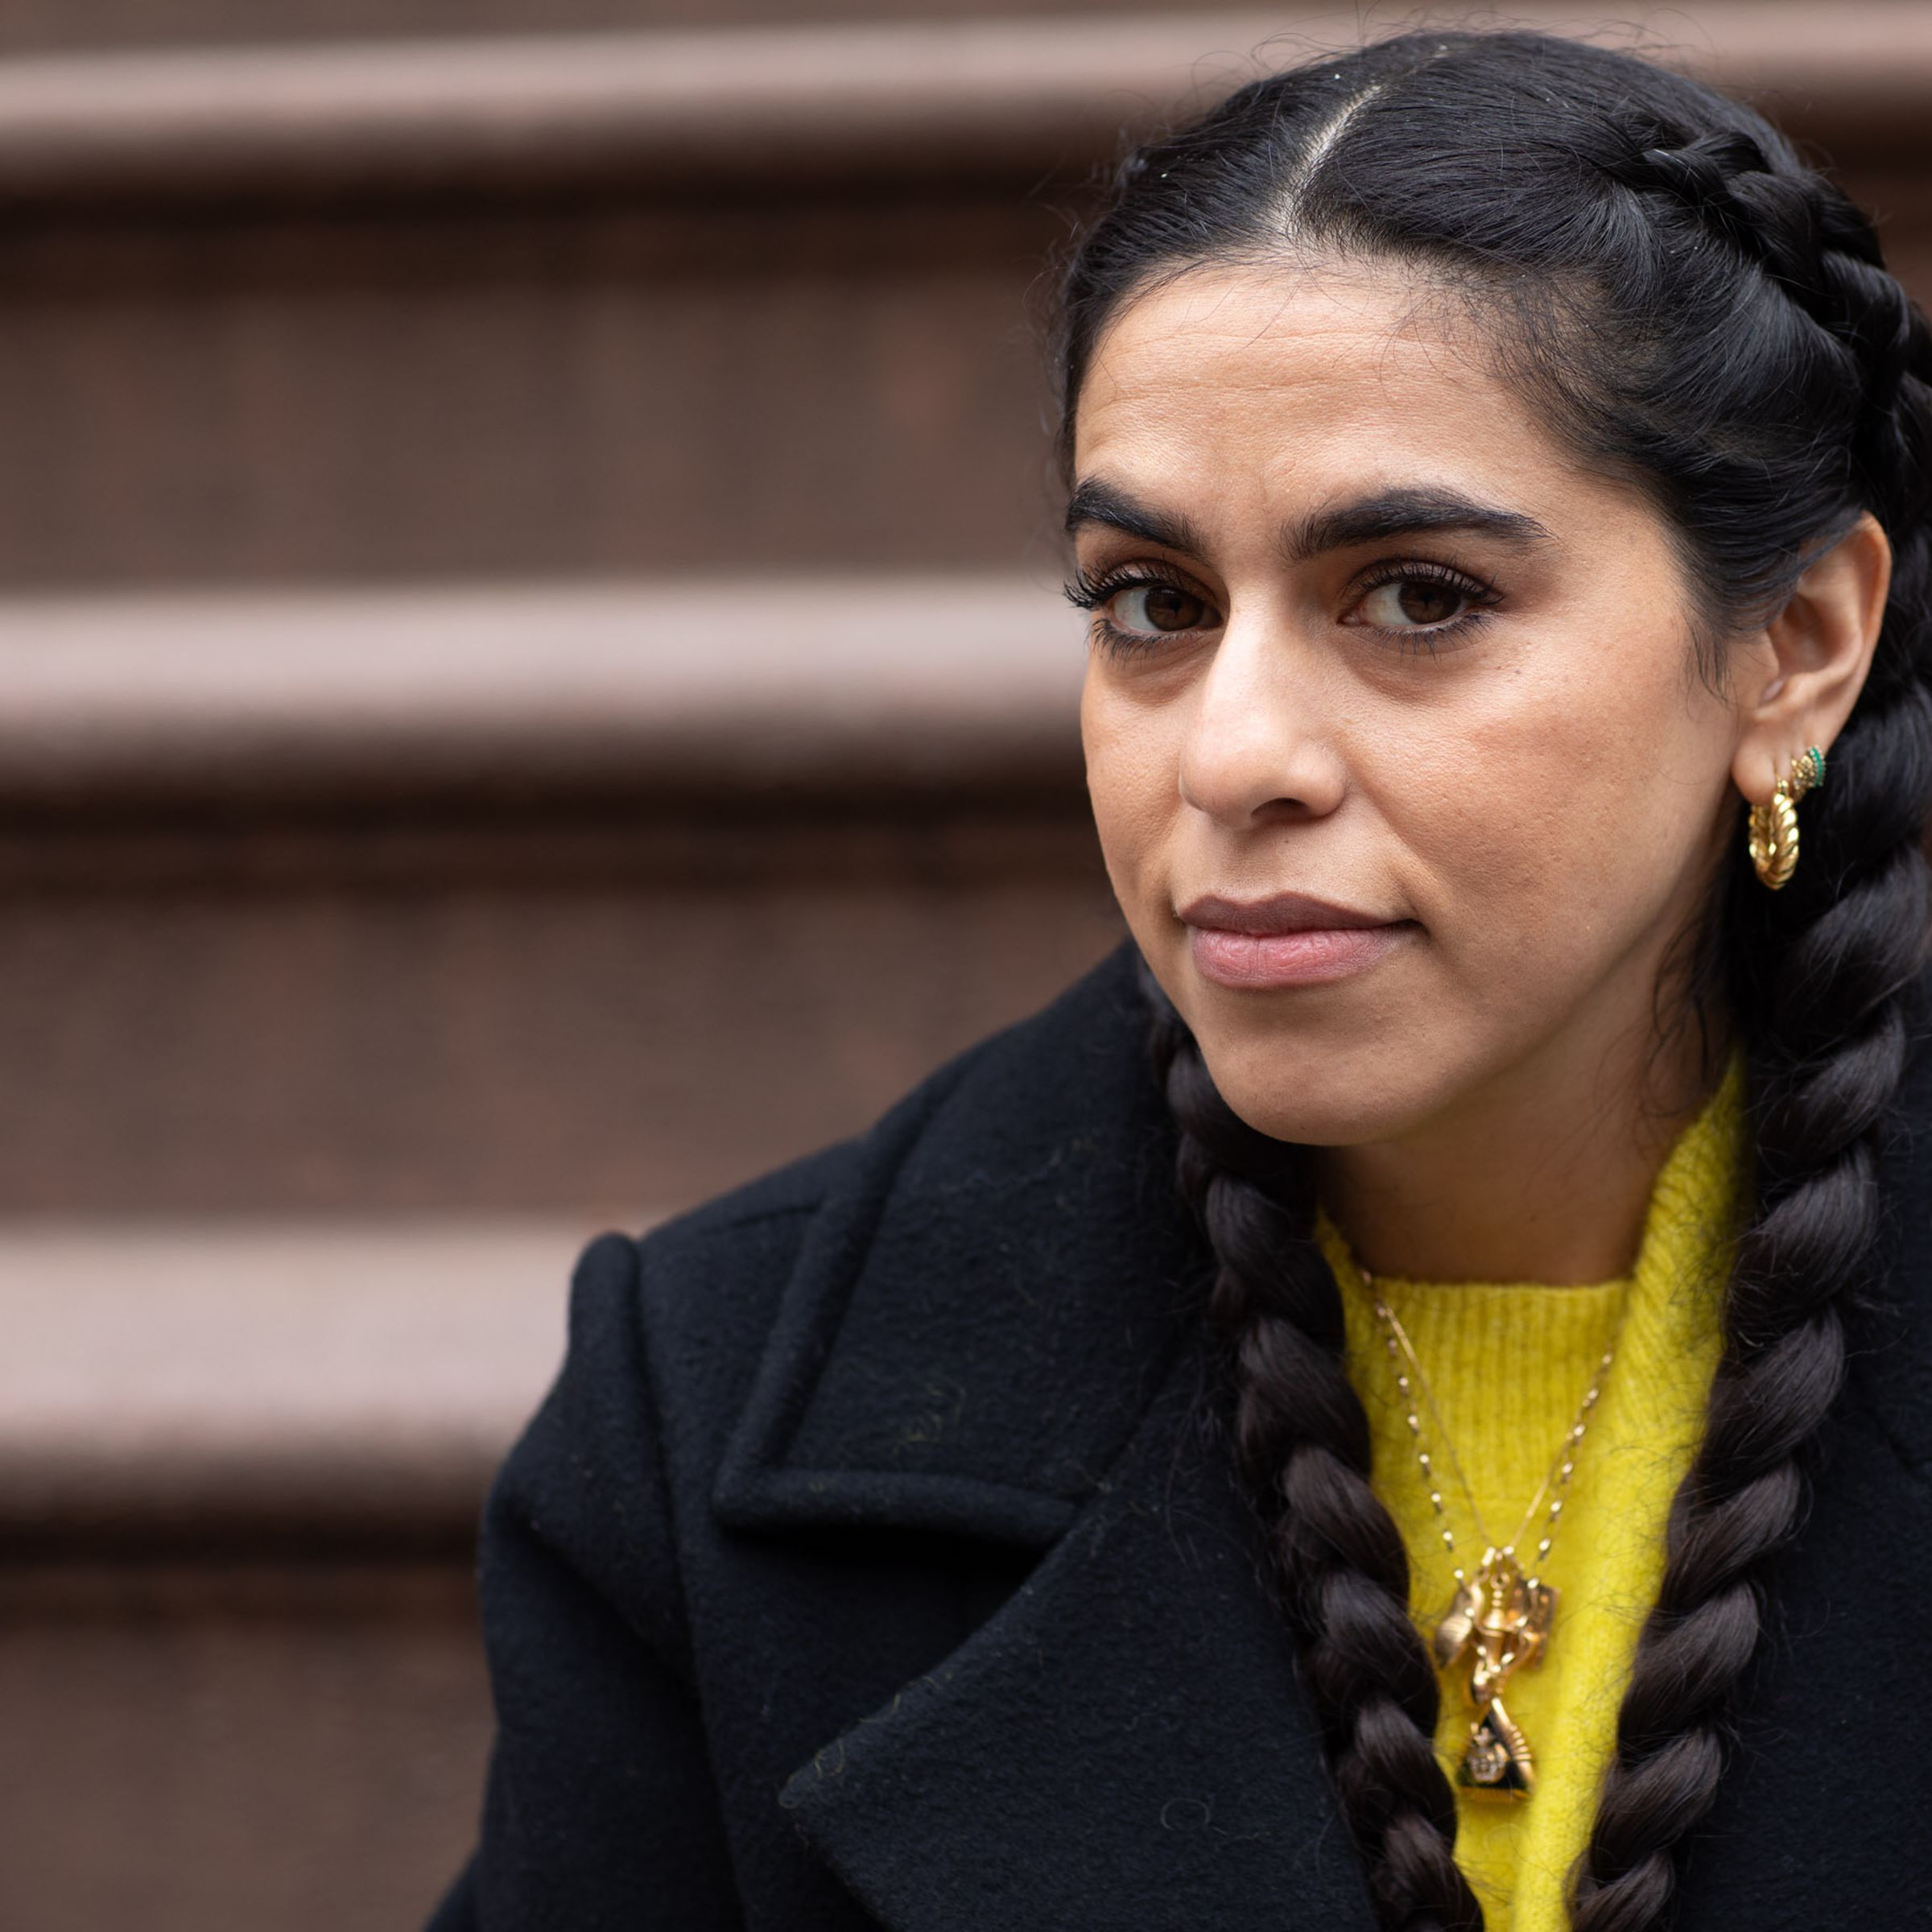 Photo of Mona Chalabi. Her hair is in two braids and she is wearing a black coat and yellow sweater. She is seated on the front steps of her apartment.